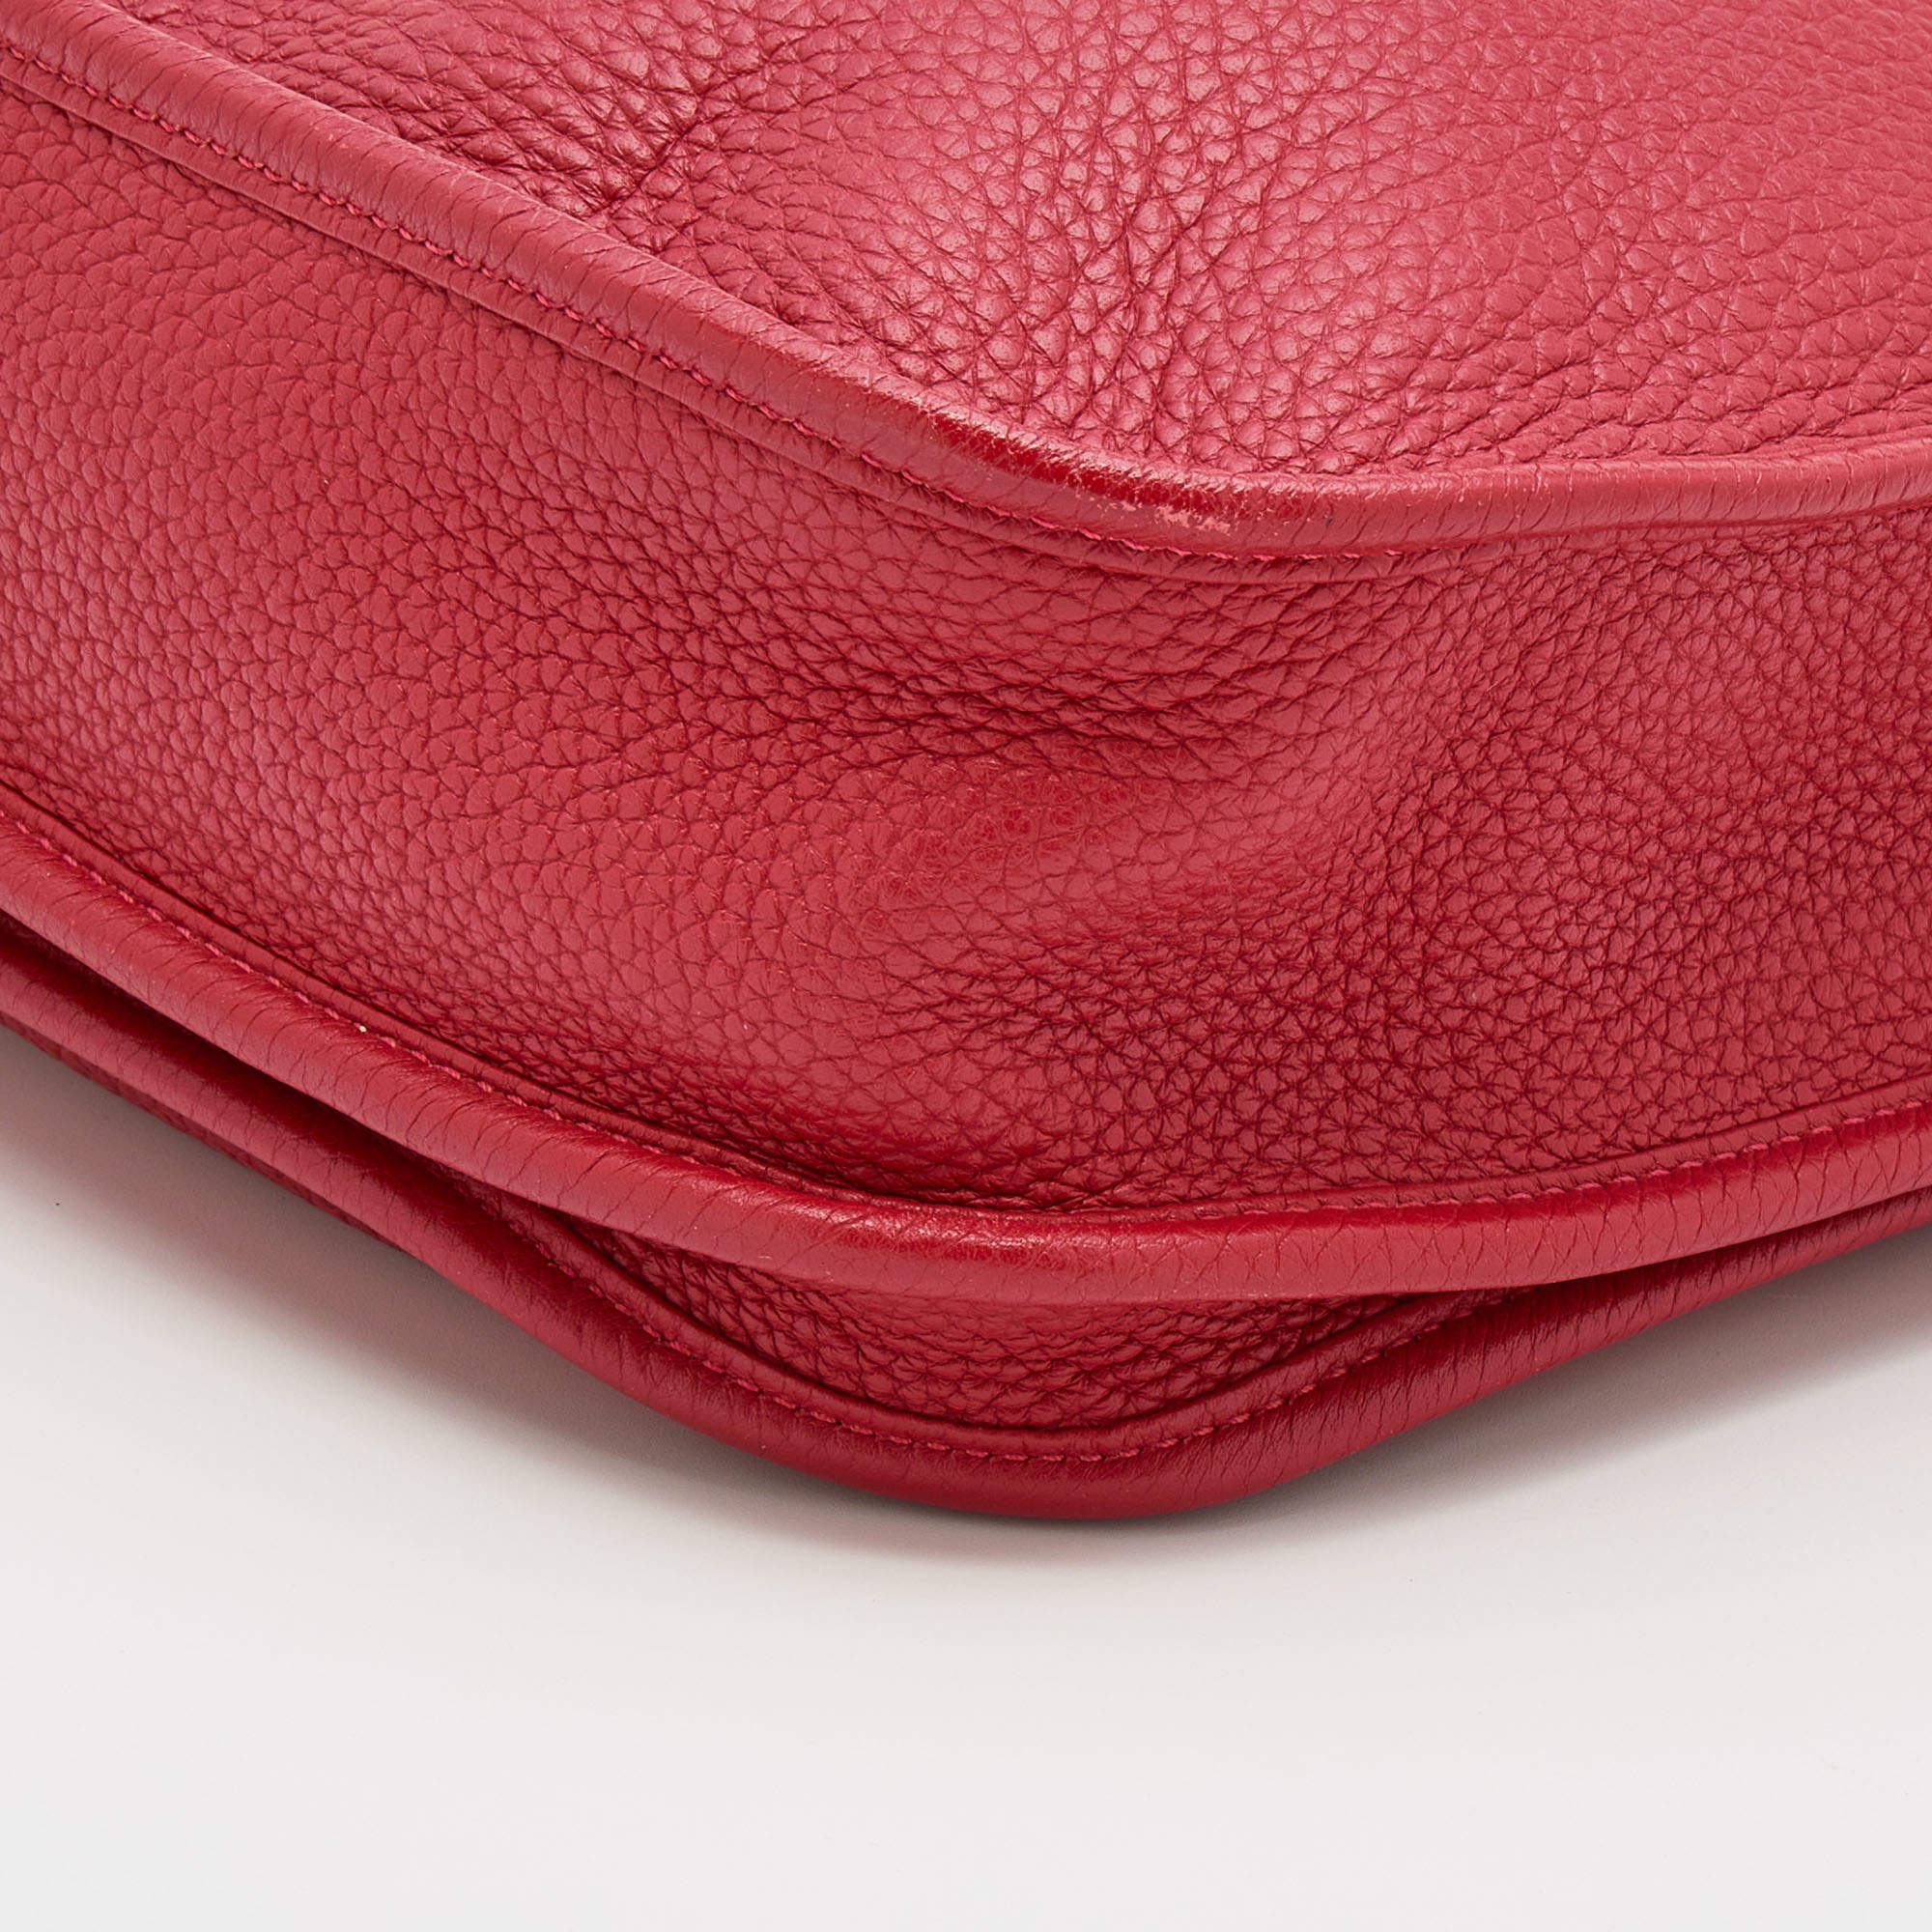 Hermès Rouge Piment Taurillon Clemence Leather Evelyne III 29 Bag